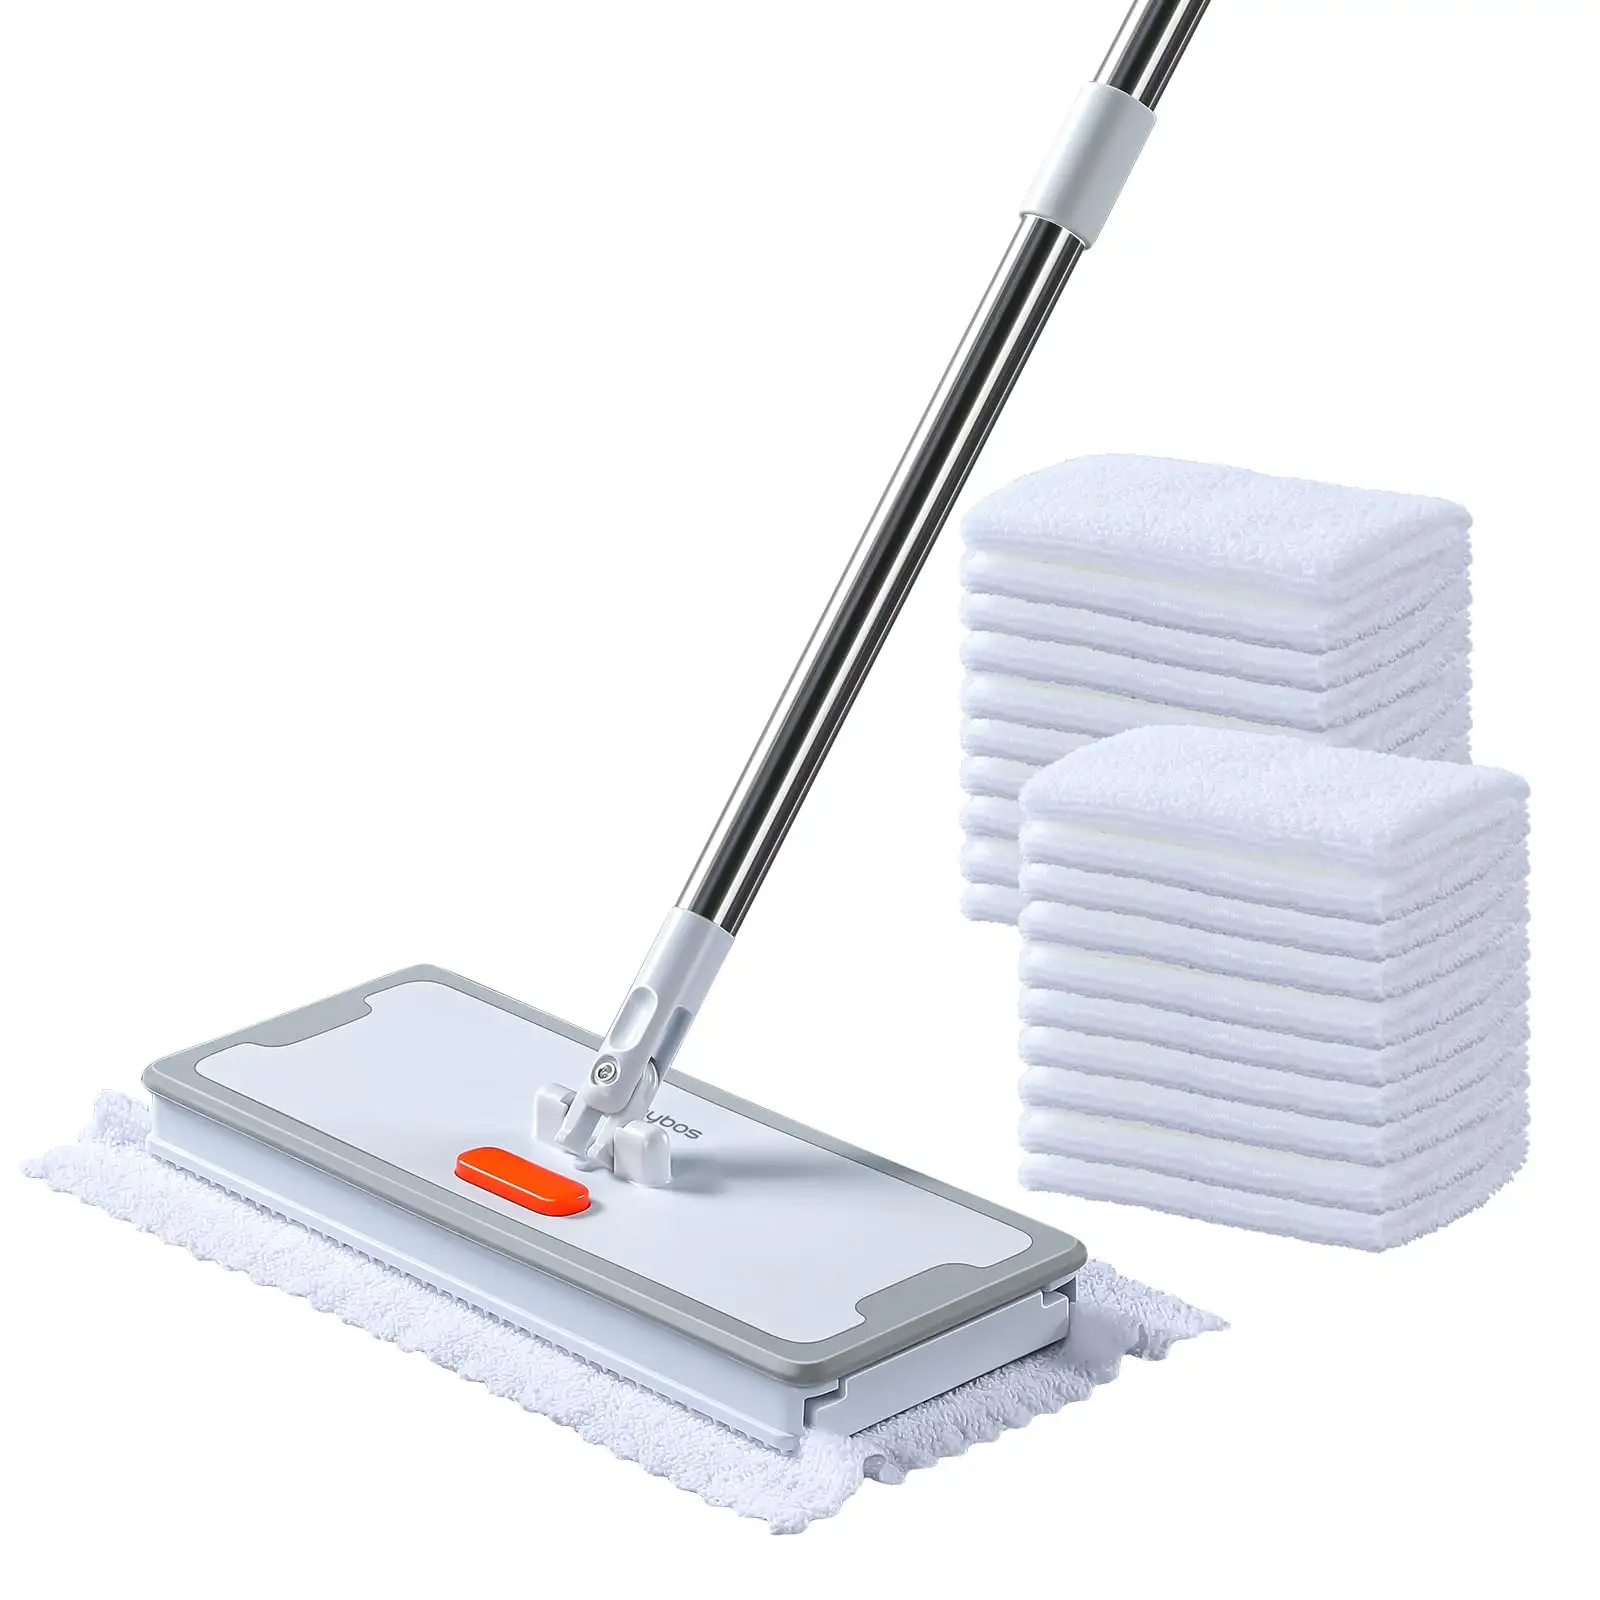 Joybos 2-in-1 Mops for Floor Cleaning Dry and Wet Multi Surface Floor Cleaning 360 Rotating Dust Mop